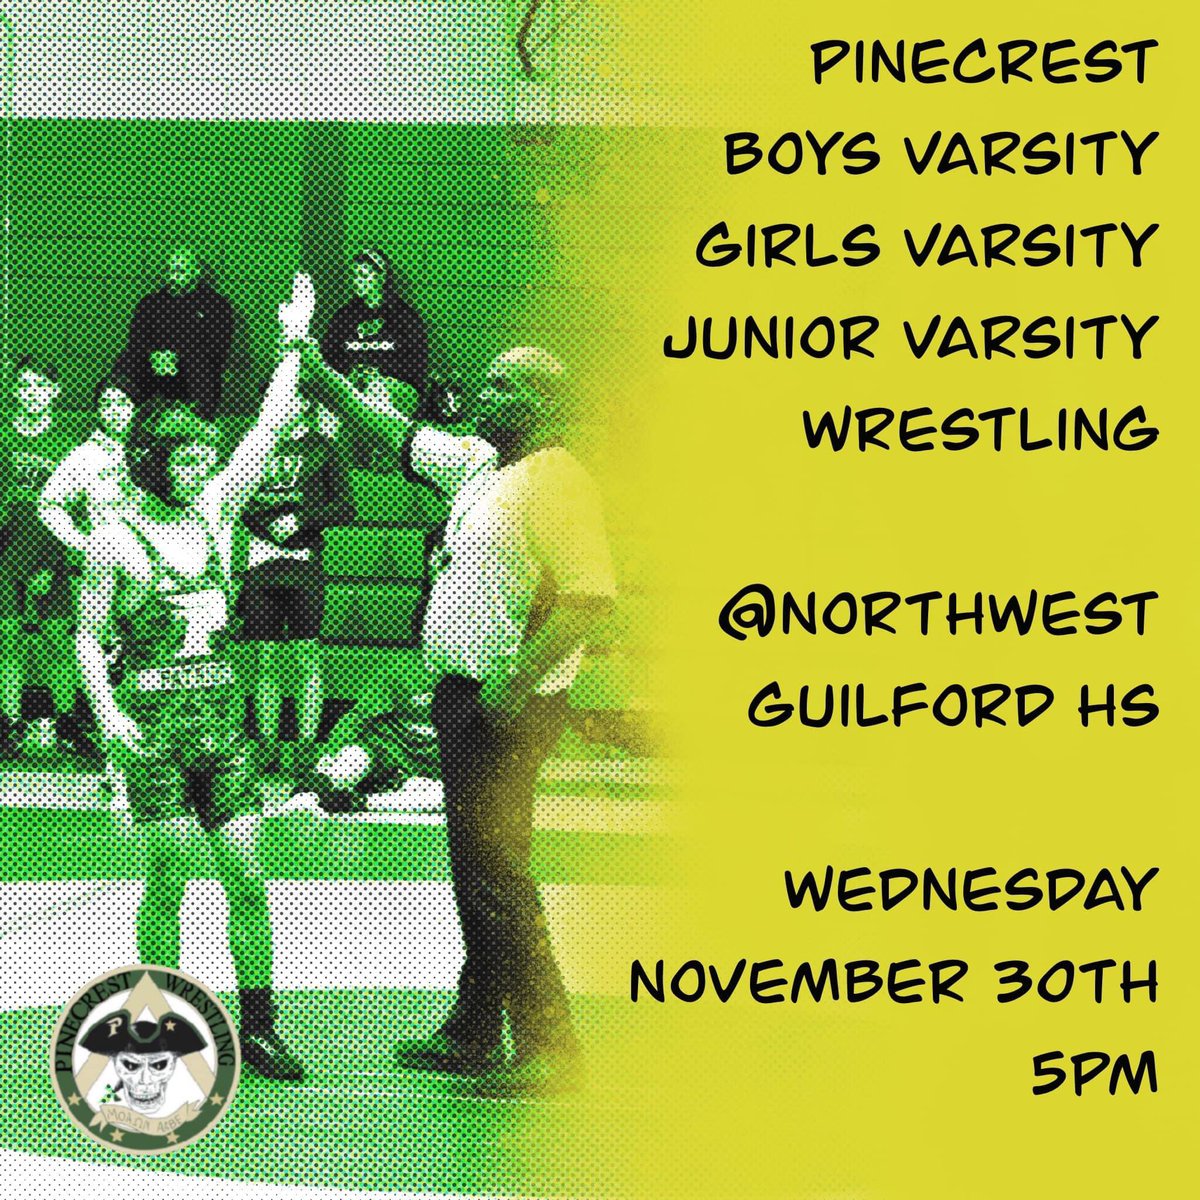 It’s going to be a great night of wrestling in Guilford County! #1 v #2 in dual team rankings! #wrestlepc